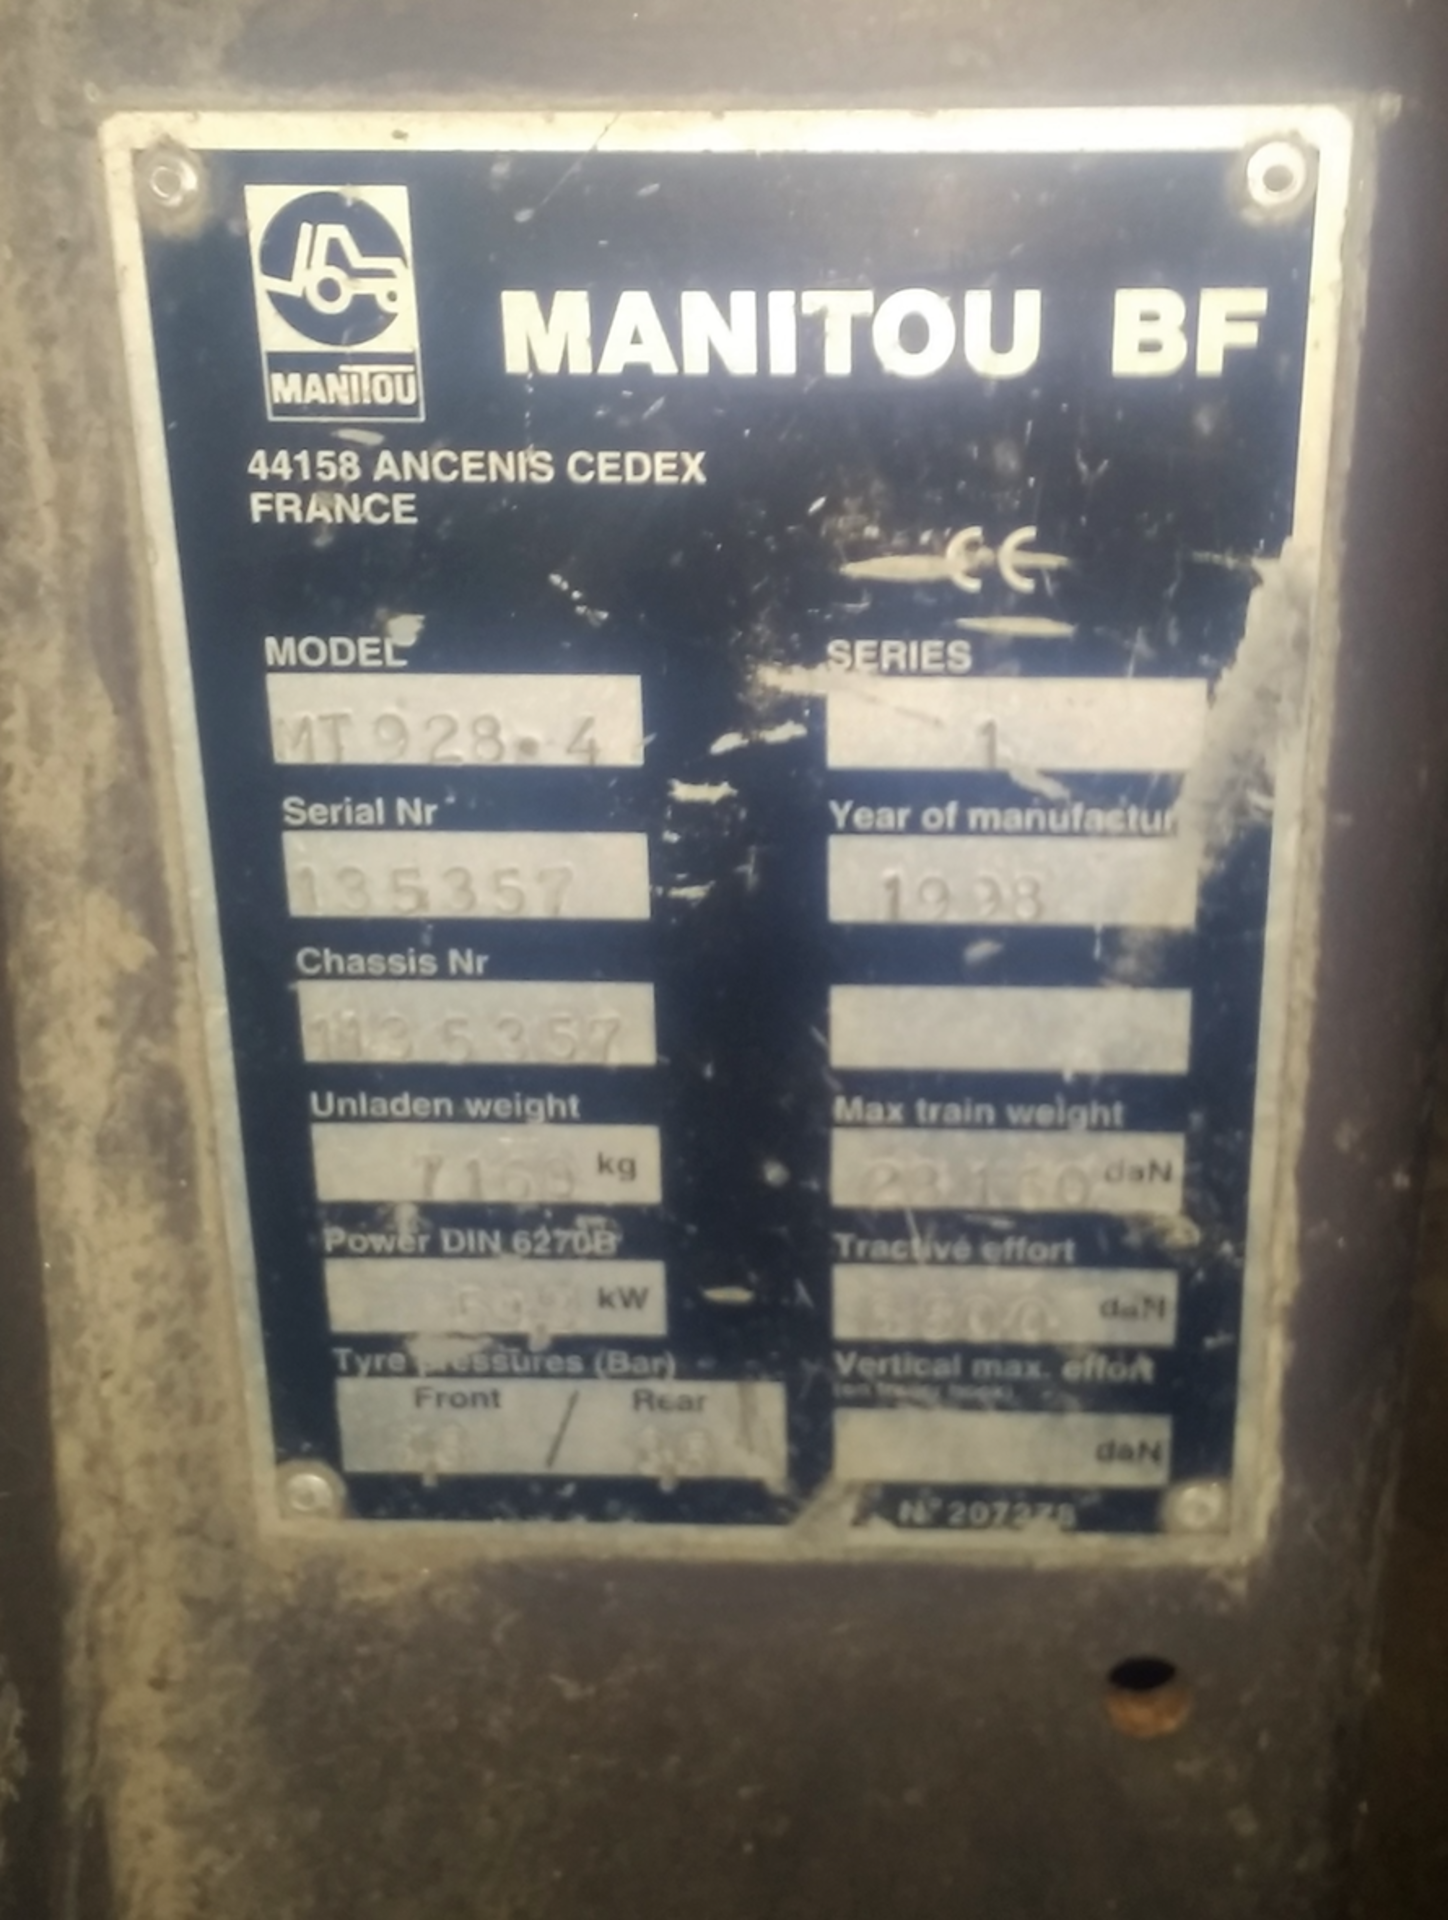 1998 9m Manitou Maniscopic, 14000Hrs - Image 5 of 5